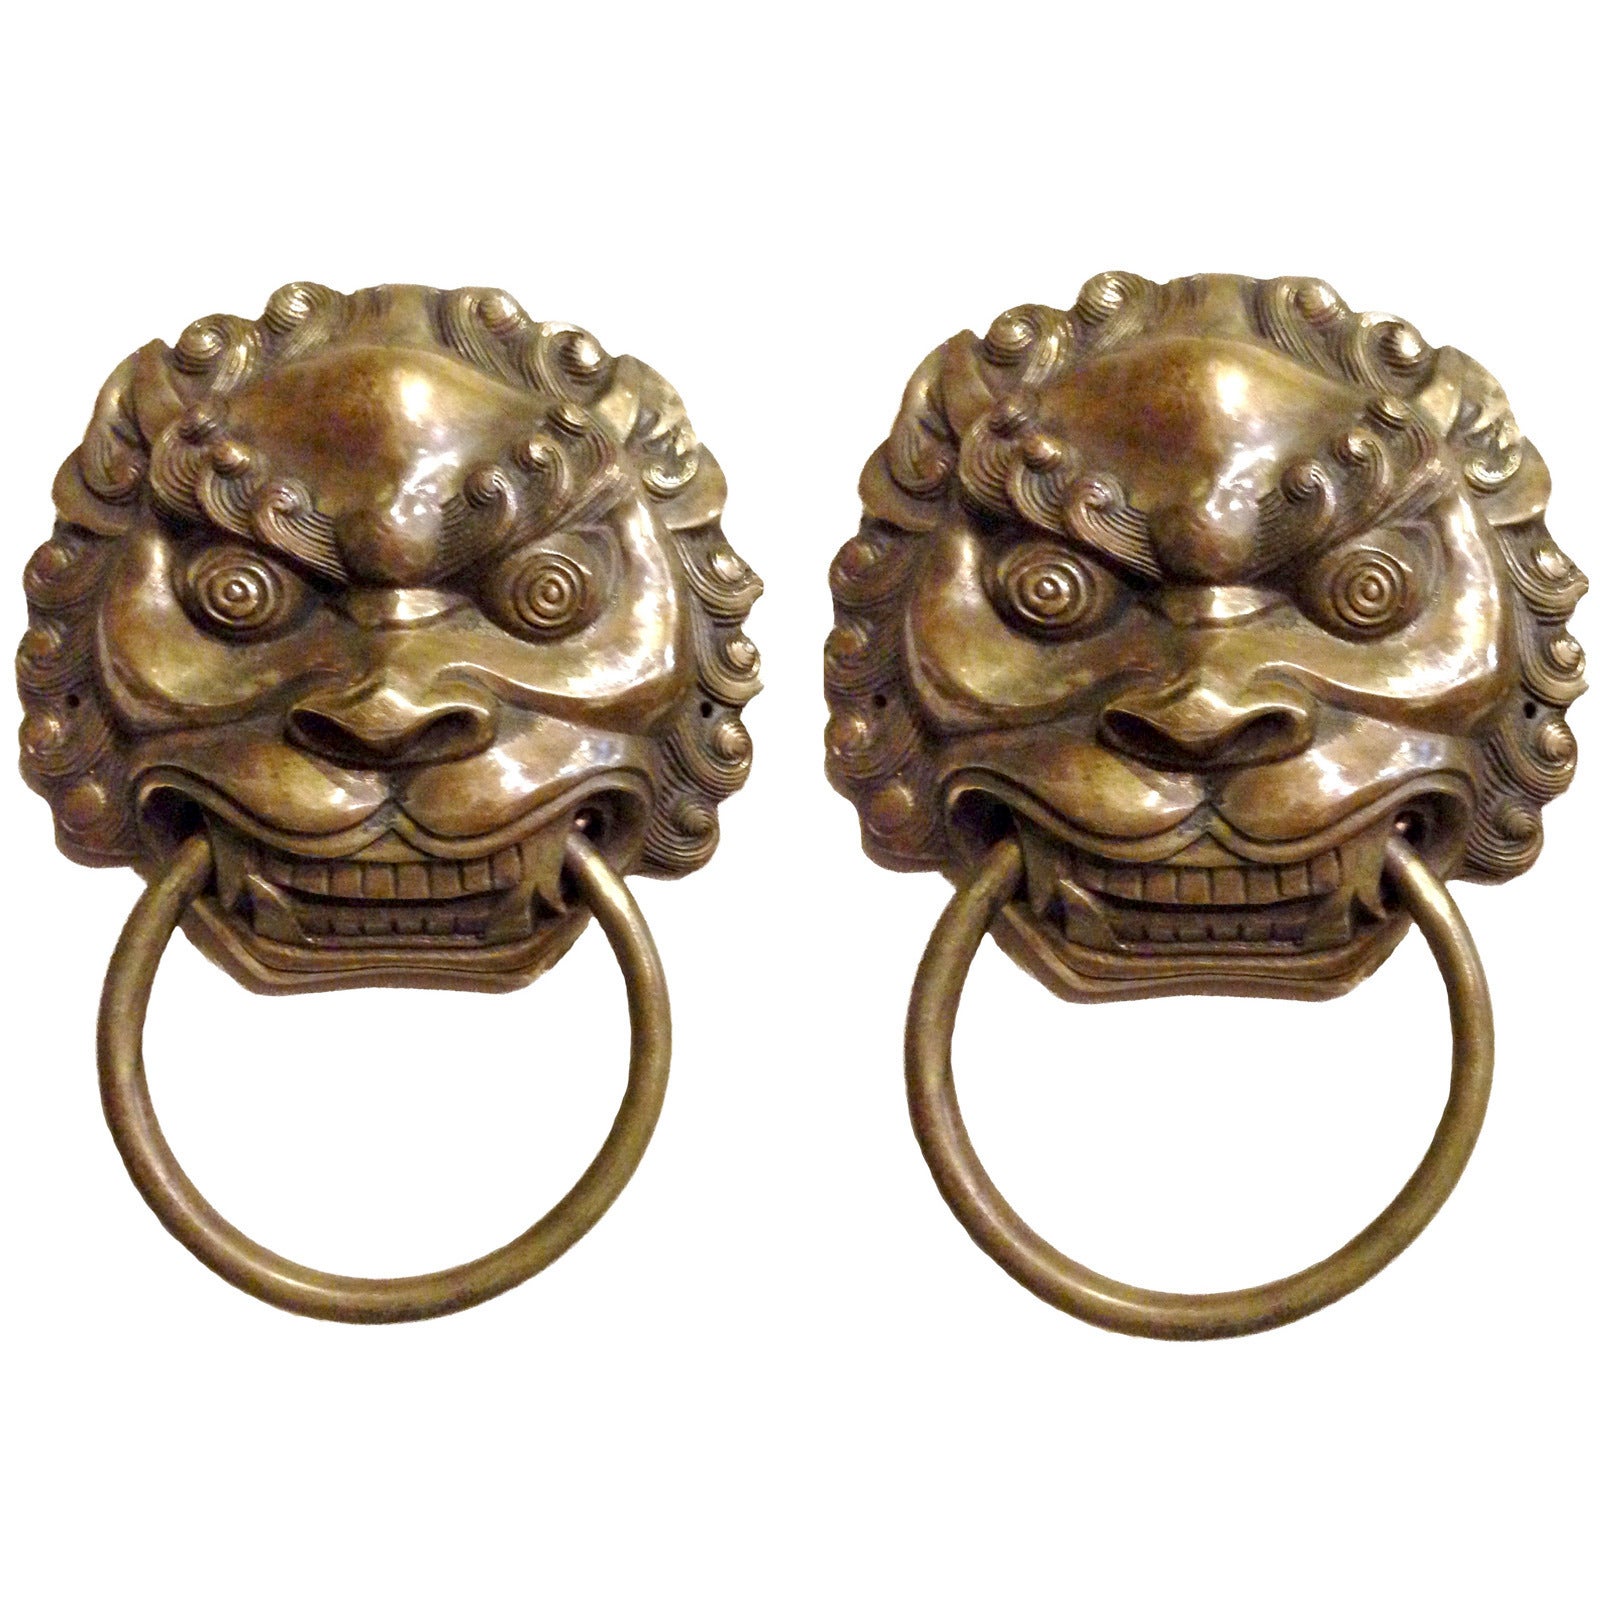 Pair of Large Chinese Brass Lion Door Knockers or Towel Rings